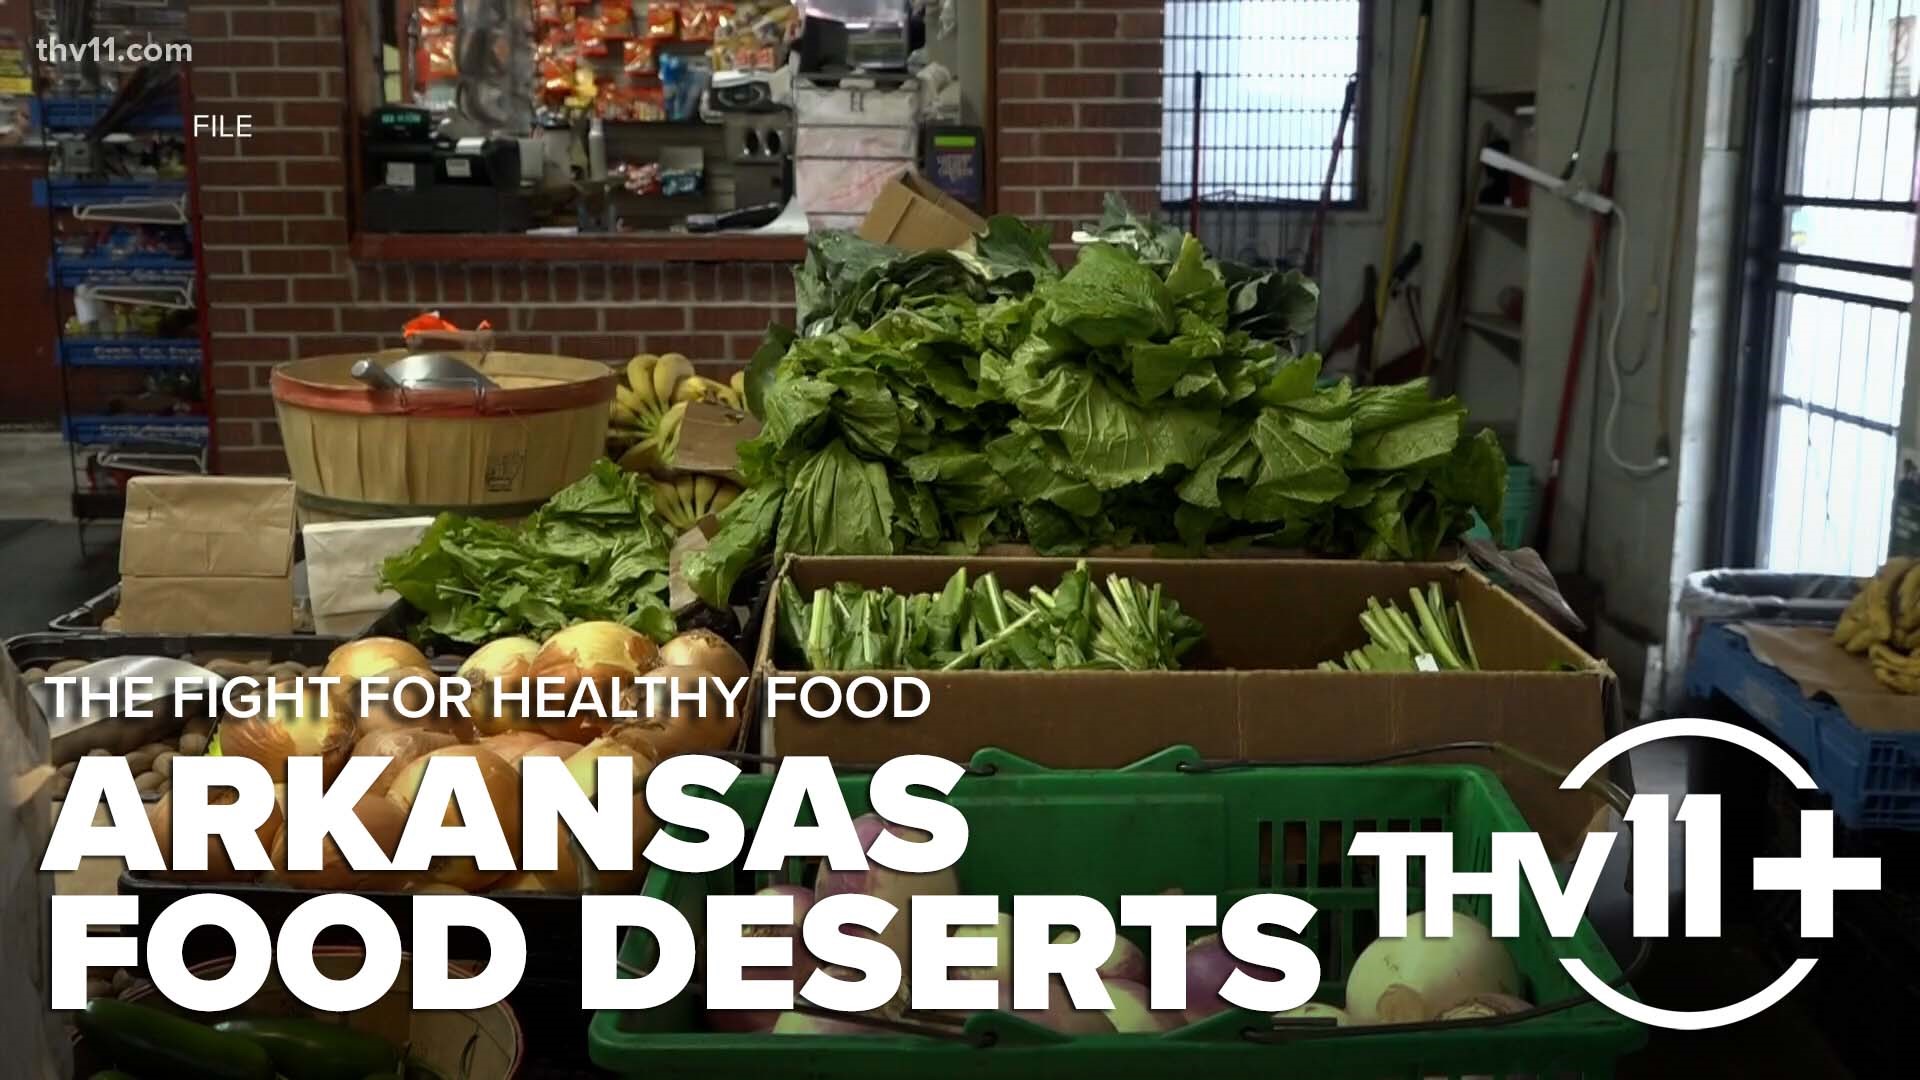 As food deserts impact many Arkansas towns, some are now launching initiatives to help people who face challenges getting to a grocery store.